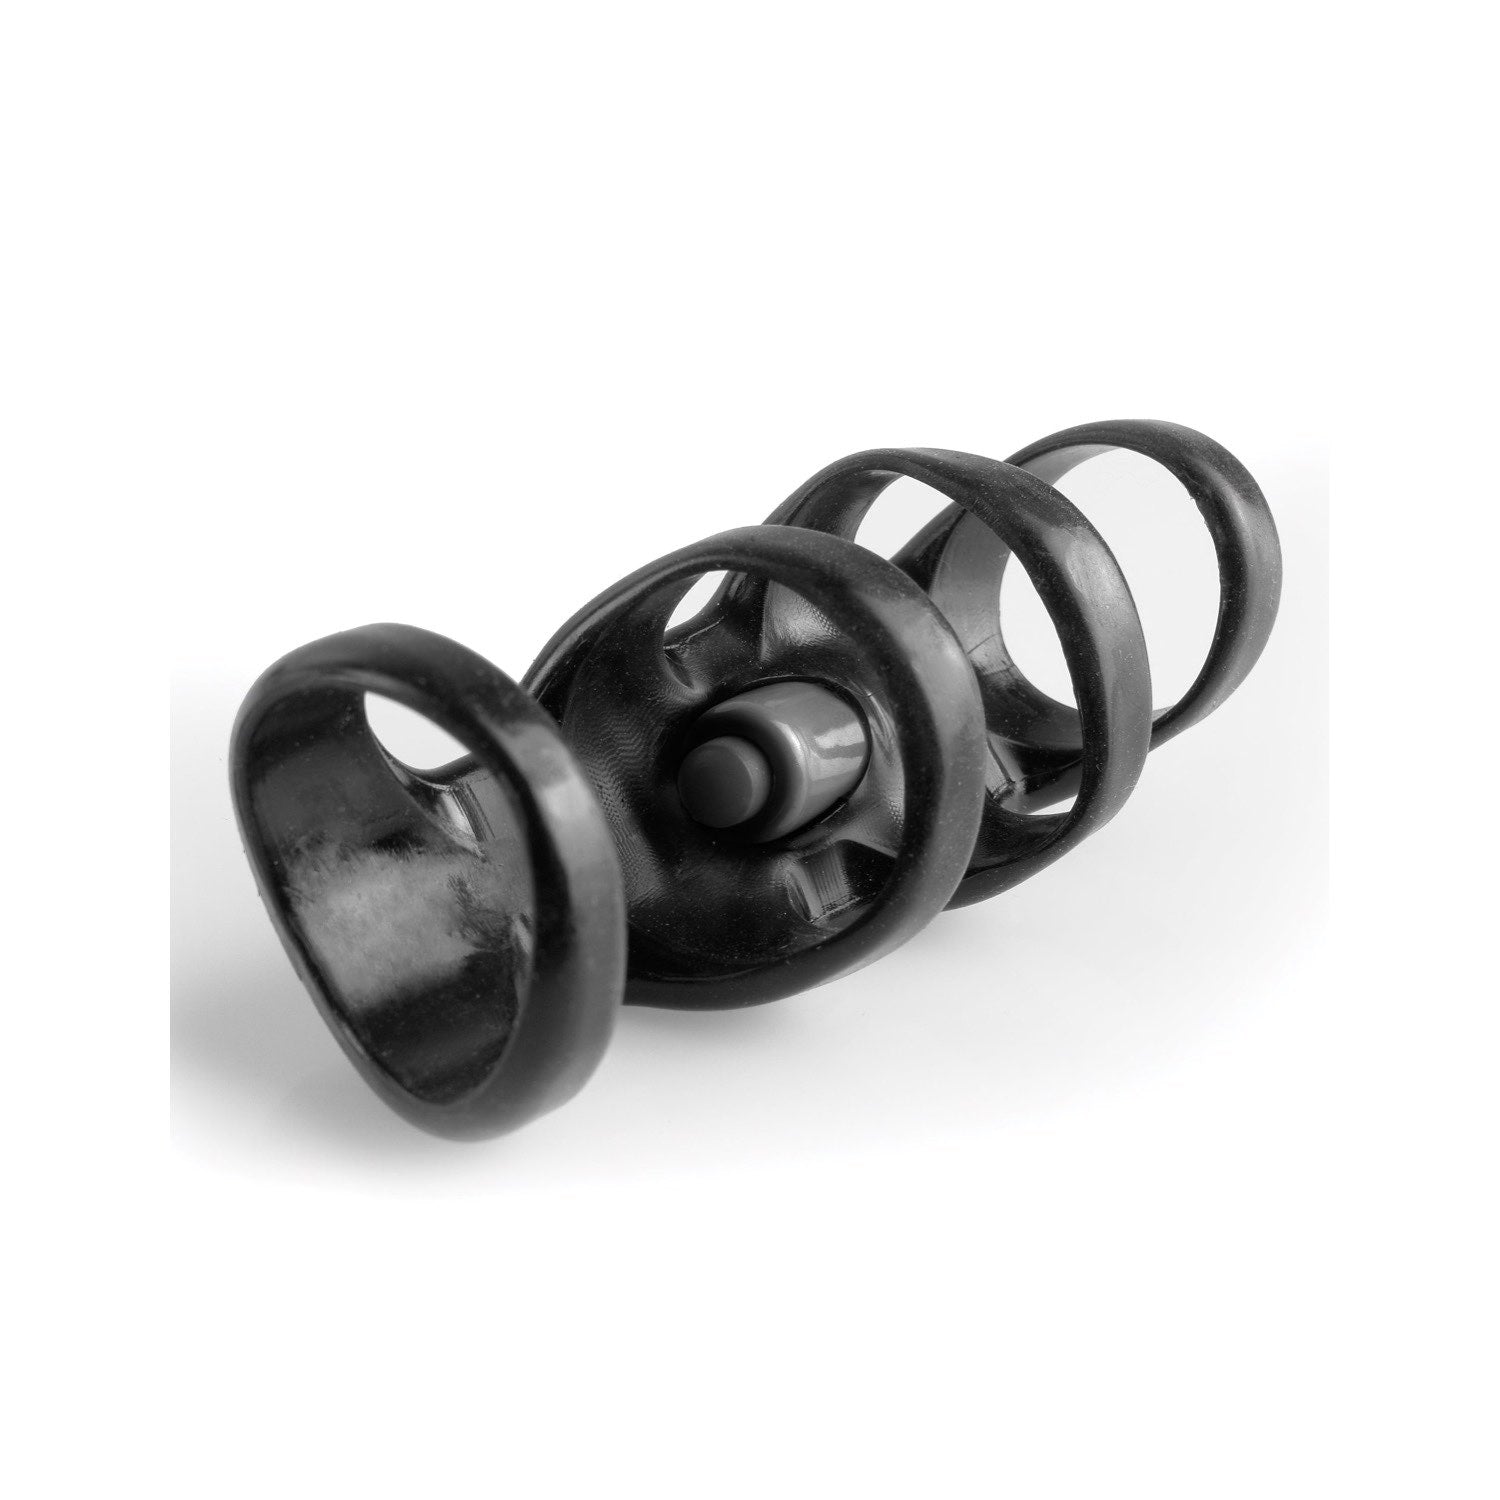 Fantasy X-Tensions Vibrating Power Cage - Black Vibrating Penis Sleeve with Ball Strap by Pipedream